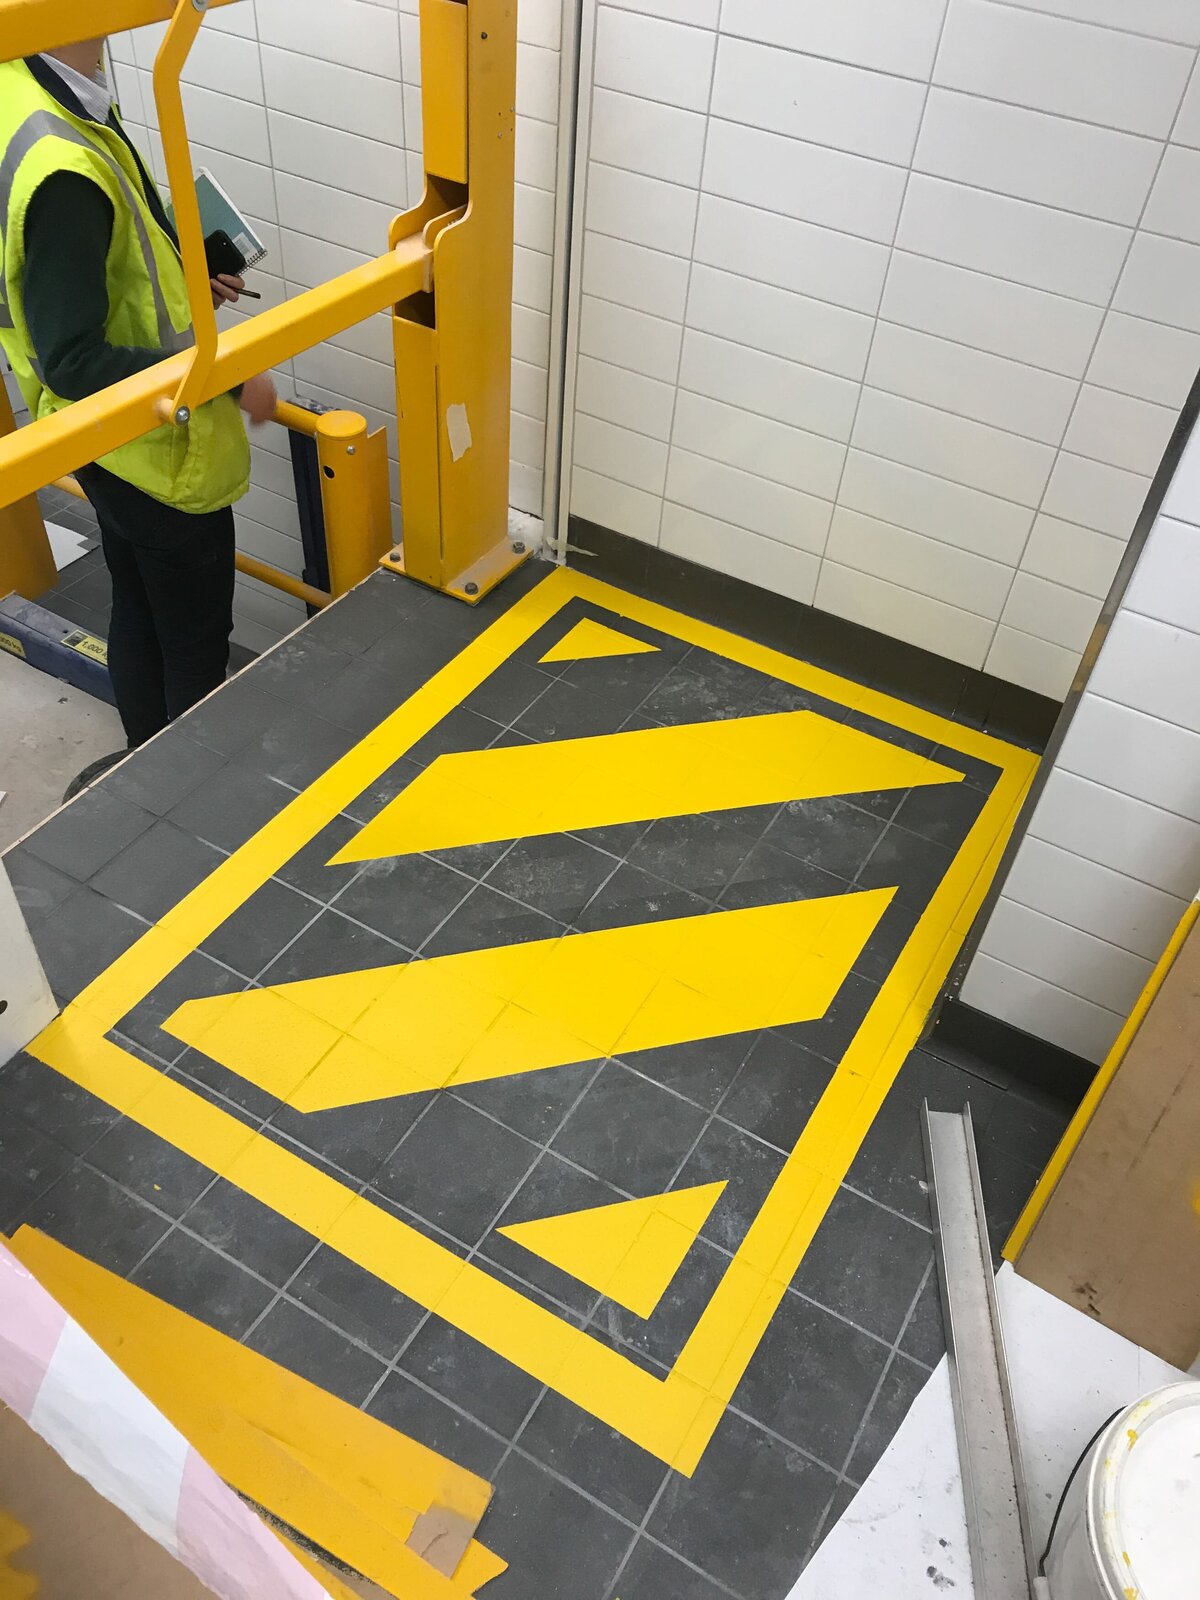 Safety line markings on external tiles.